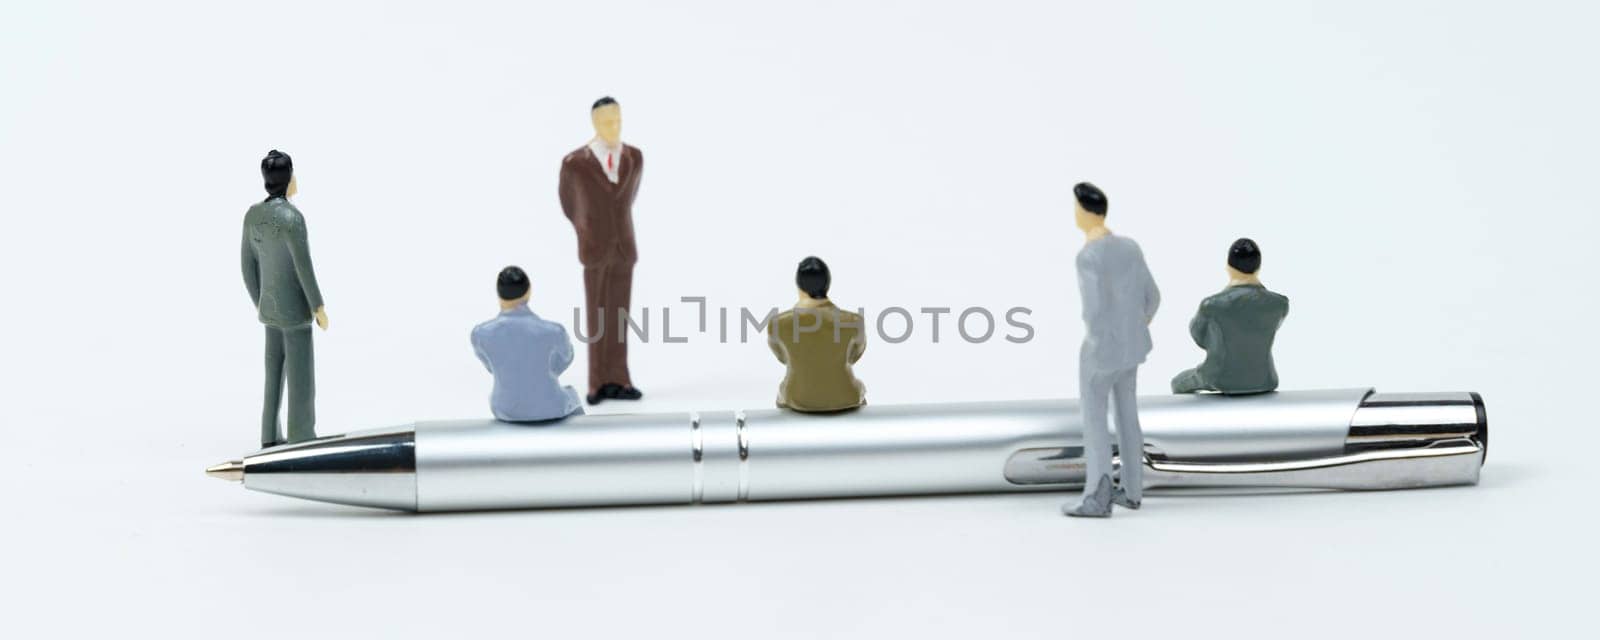 On a white surface are miniature figures of businessmen - holding a meeting, a seminar. by Sd28DimoN_1976